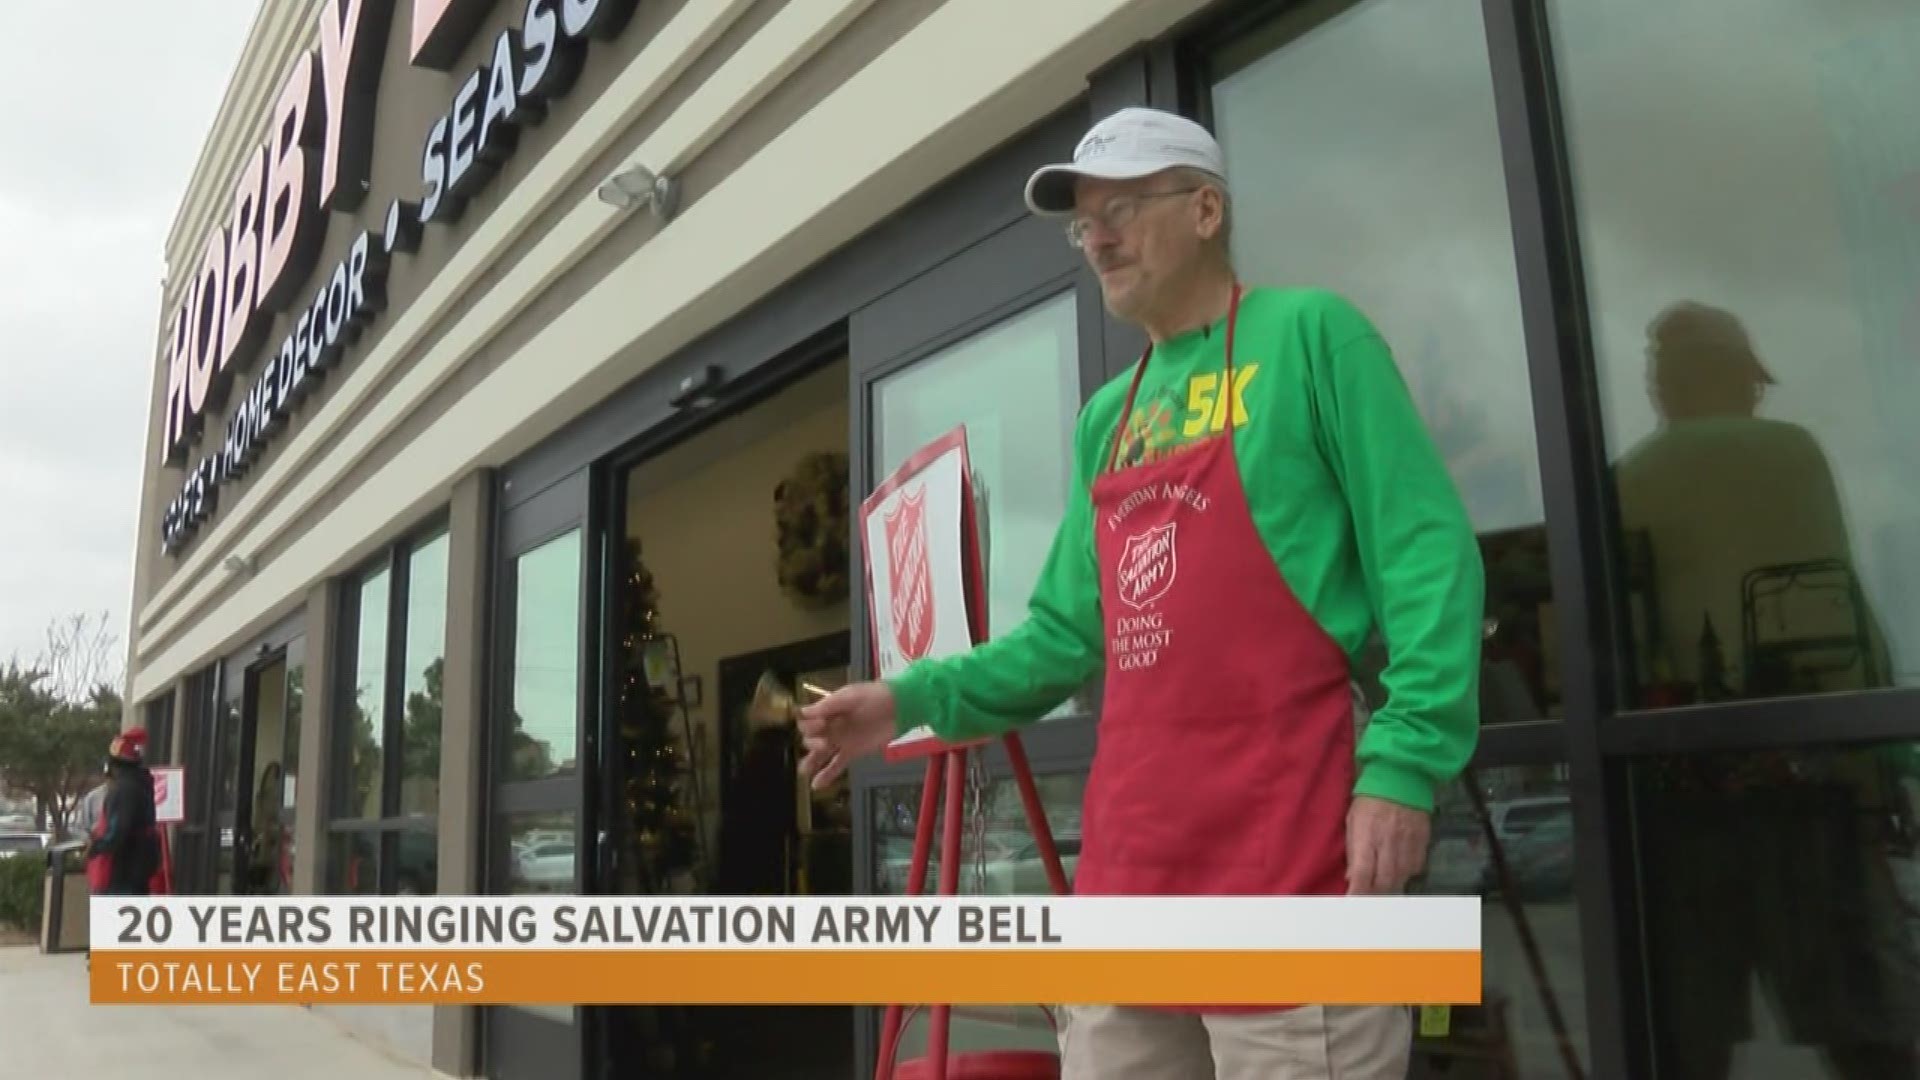 David Booth will spend 14 days ringing the Salvation Army Bell and manning a red kettle. His giving spirit is 'Totally East Texas.'